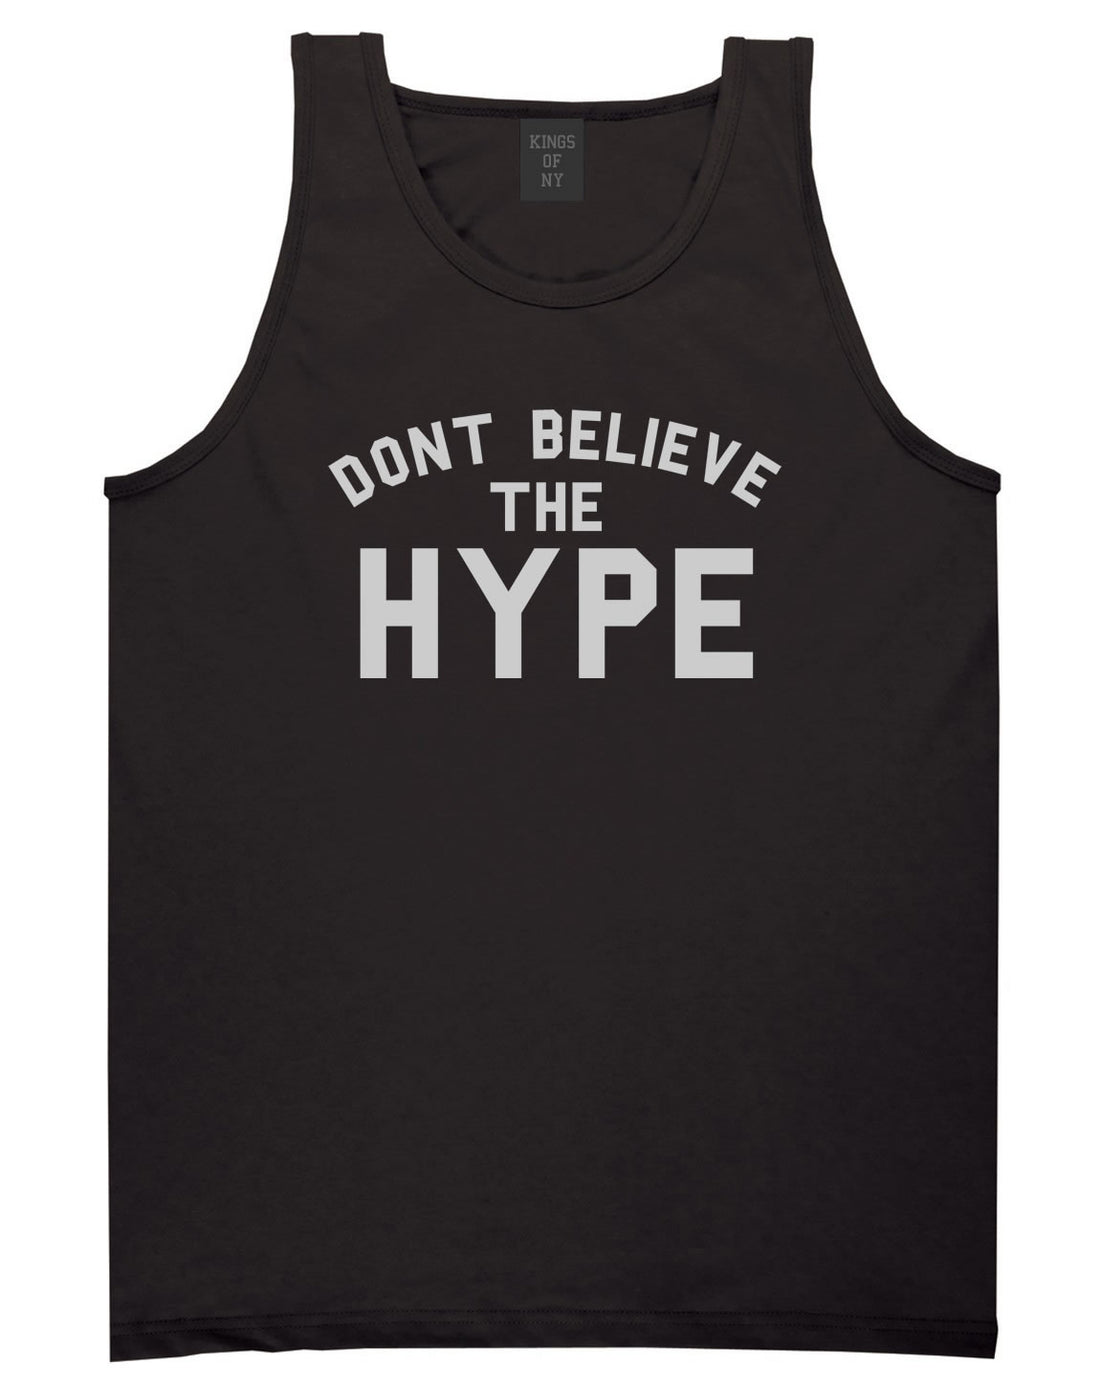 Don't Believe The Hype Tank Top in Black By Kings Of NY